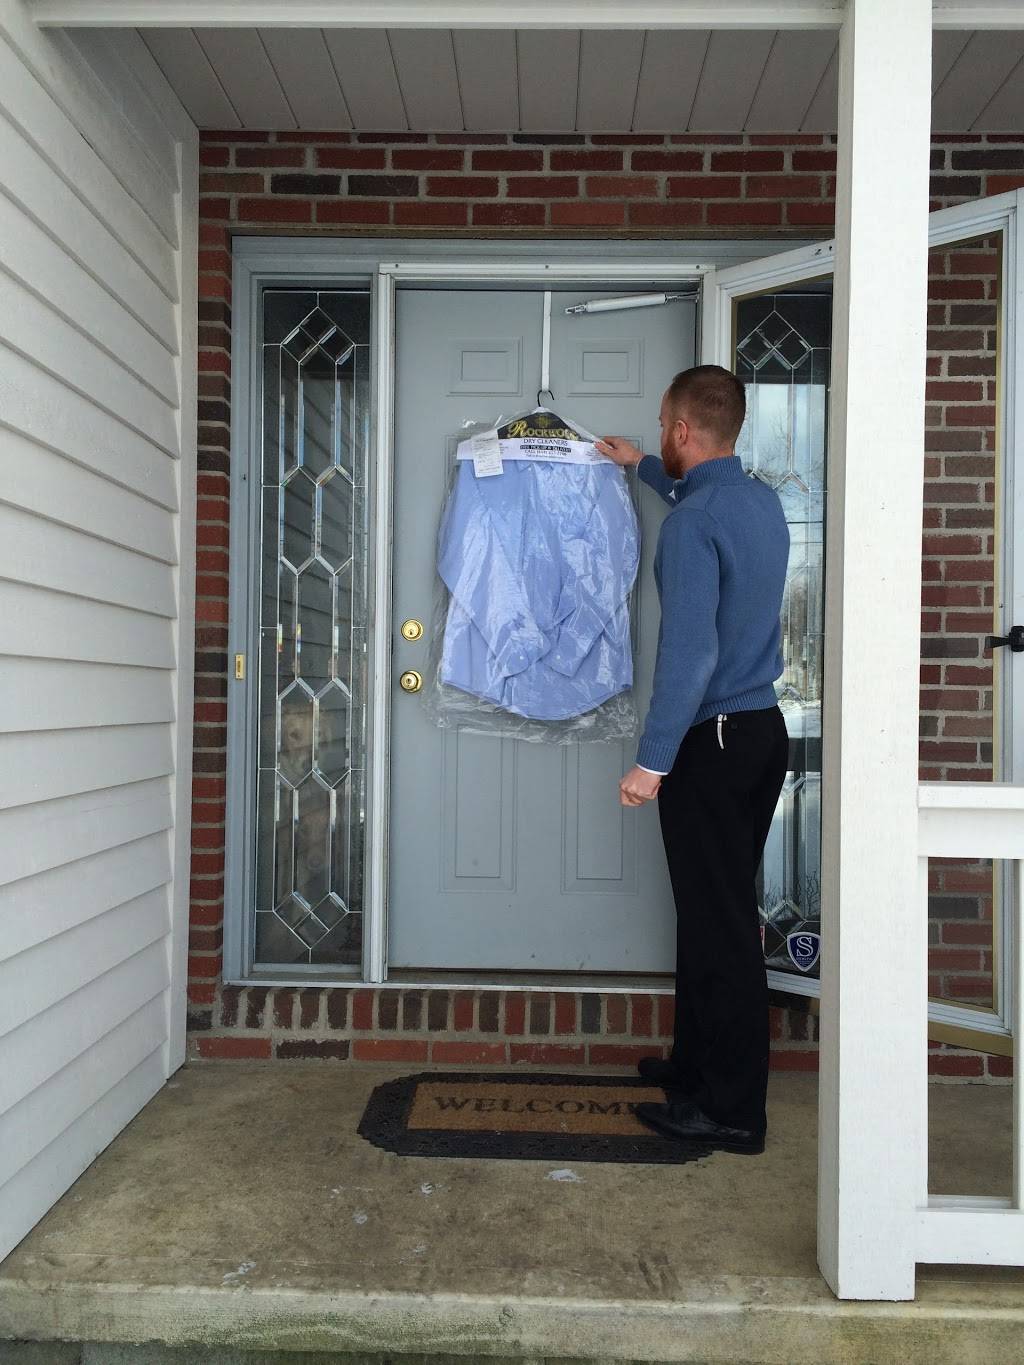 Rockwood Dry Cleaners | 1374 E Johnstown Rd, Gahanna, OH 43230, USA | Phone: (614) 939-2532